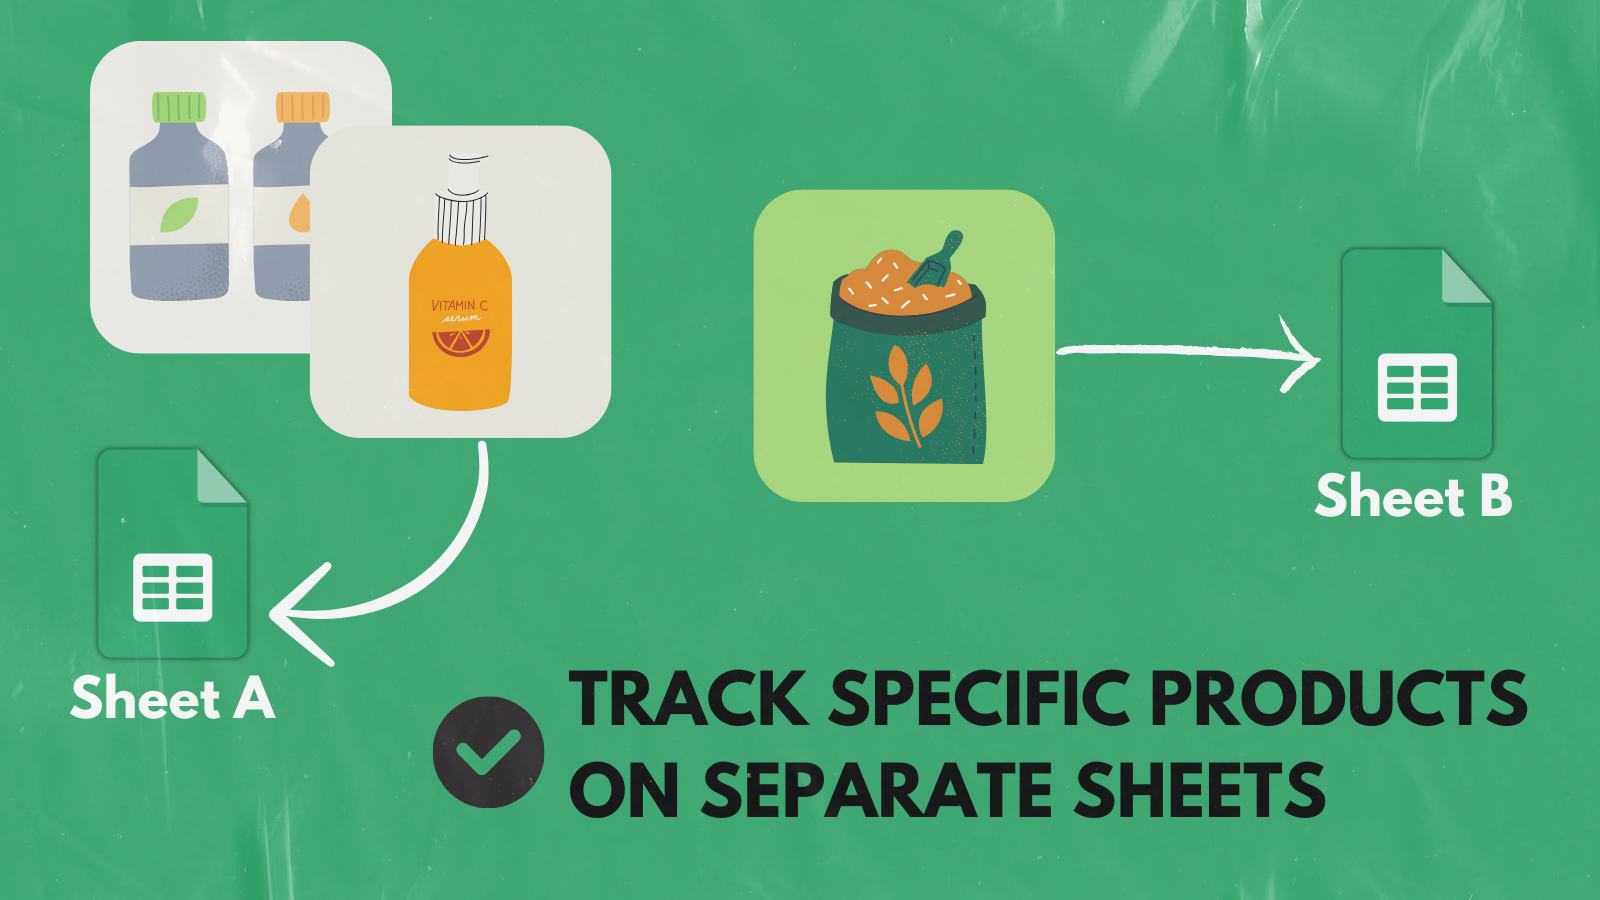 Track specific products